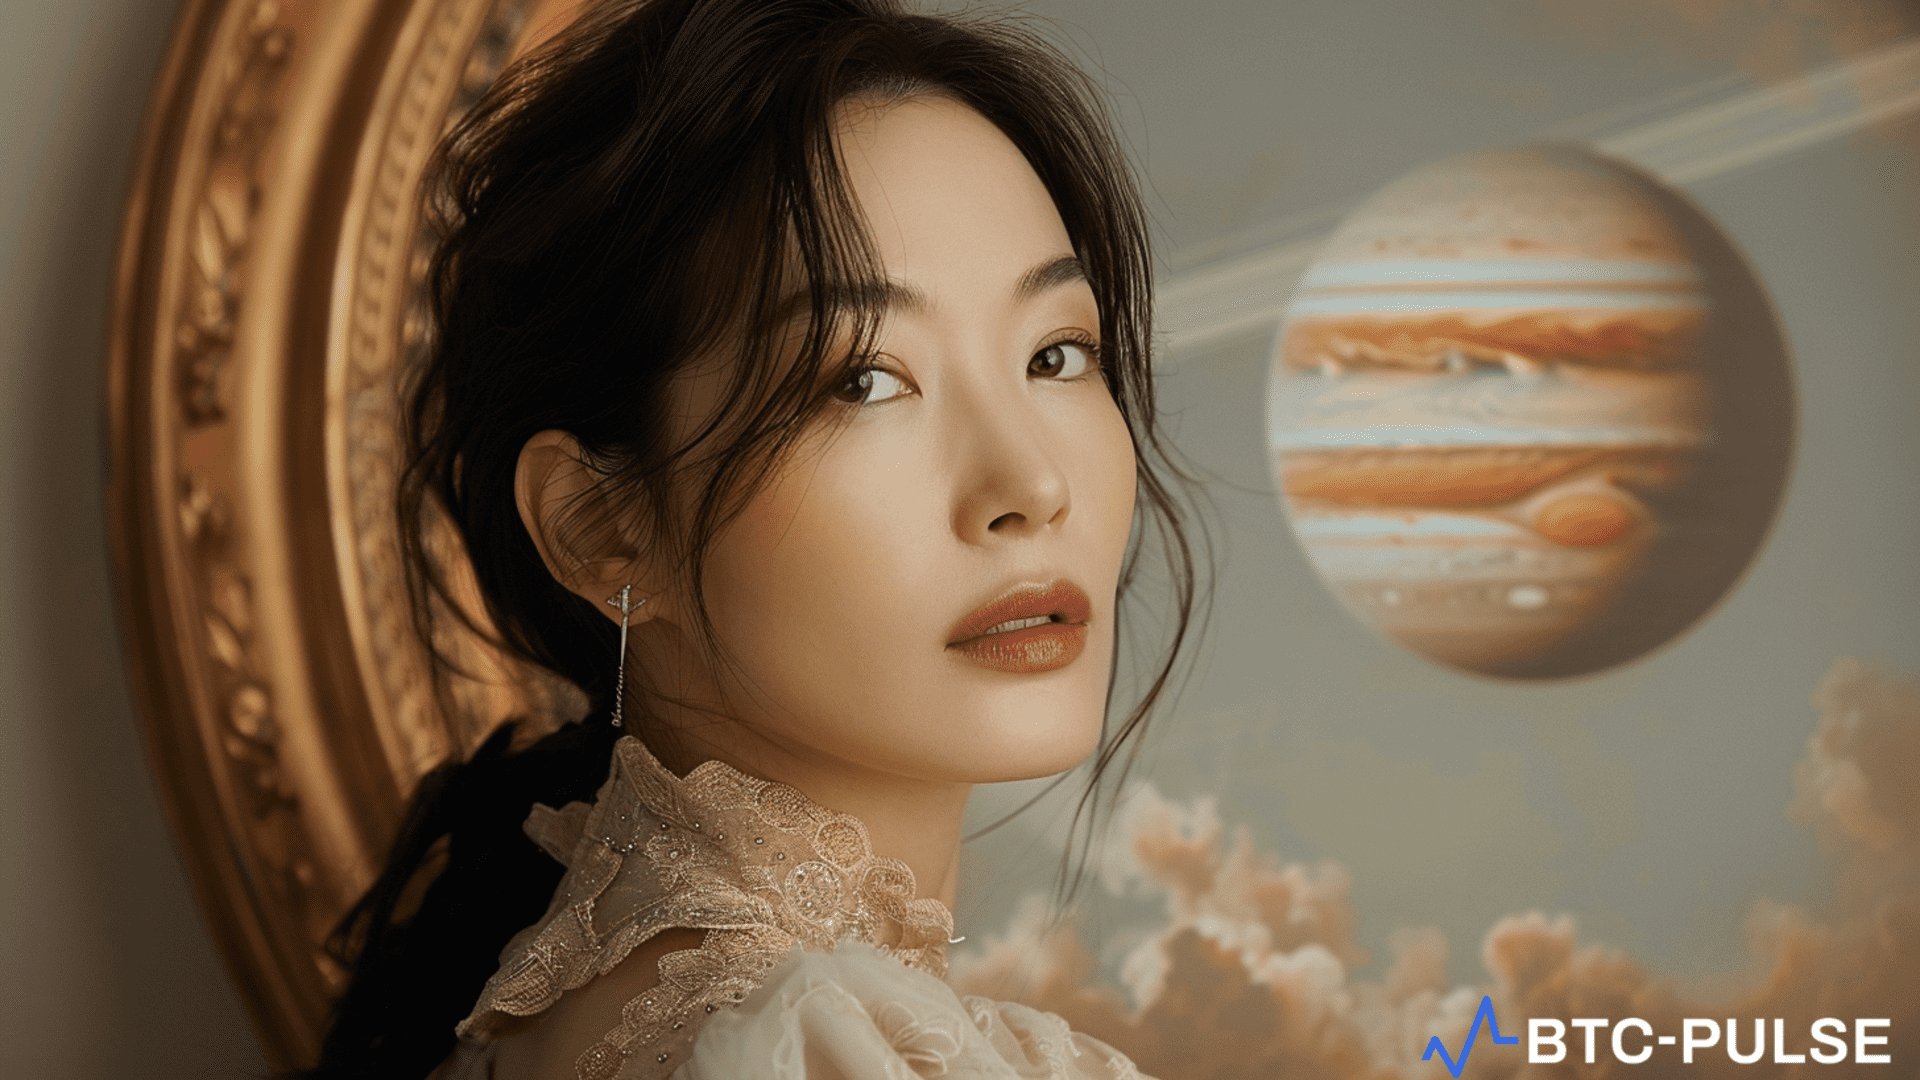 Solana-Based Jupiter Sparks Controversy for Collaborating with Irene Zhao